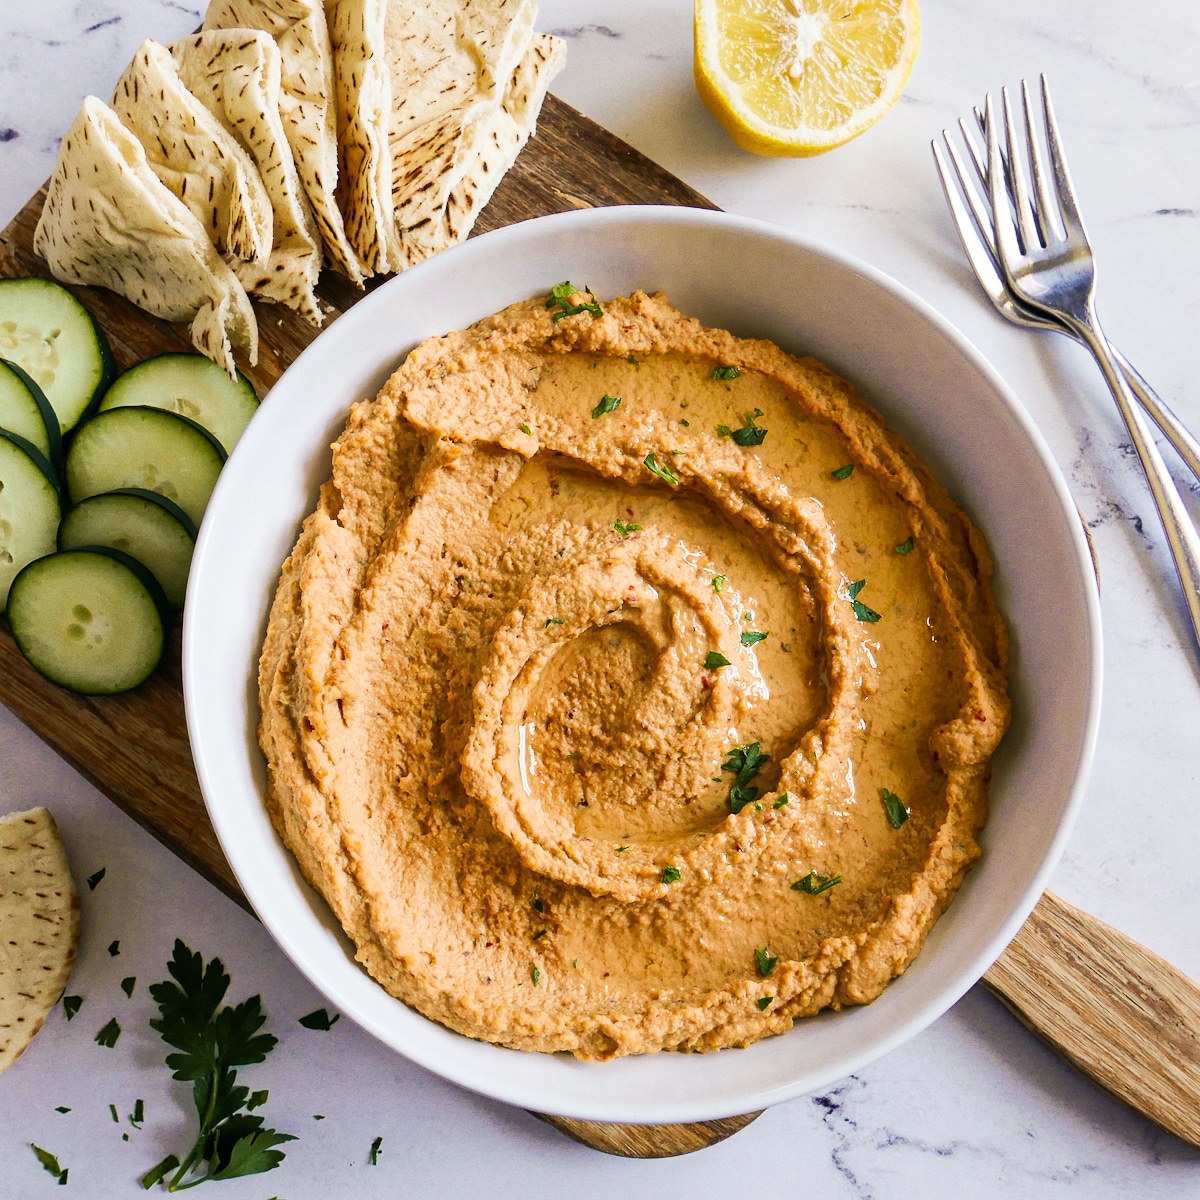 Bowl of spicy hummus garnished with fresh parsley.